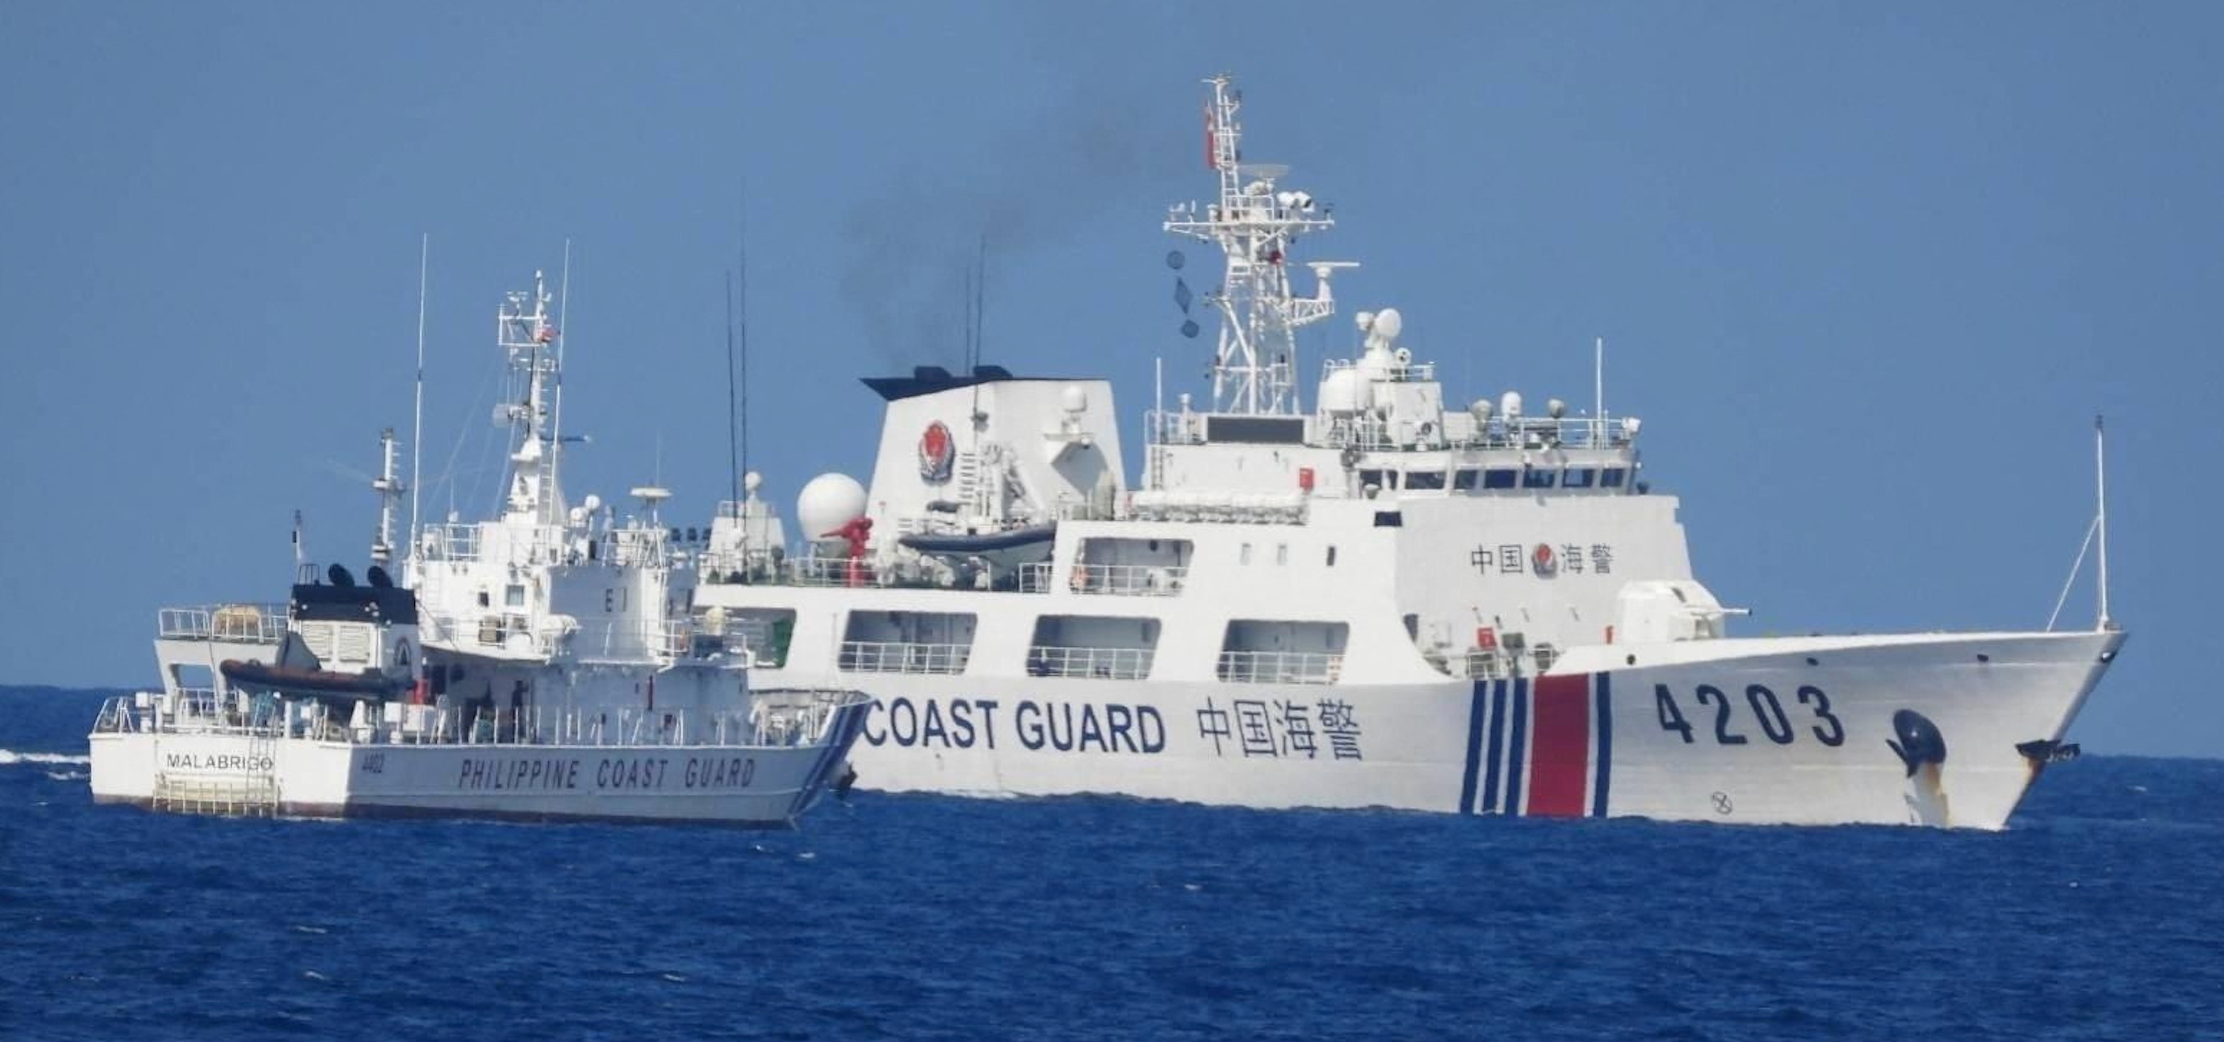 A Chinese Coast Guard ship allegedly obstructs the Philippine Coast Guard vessel